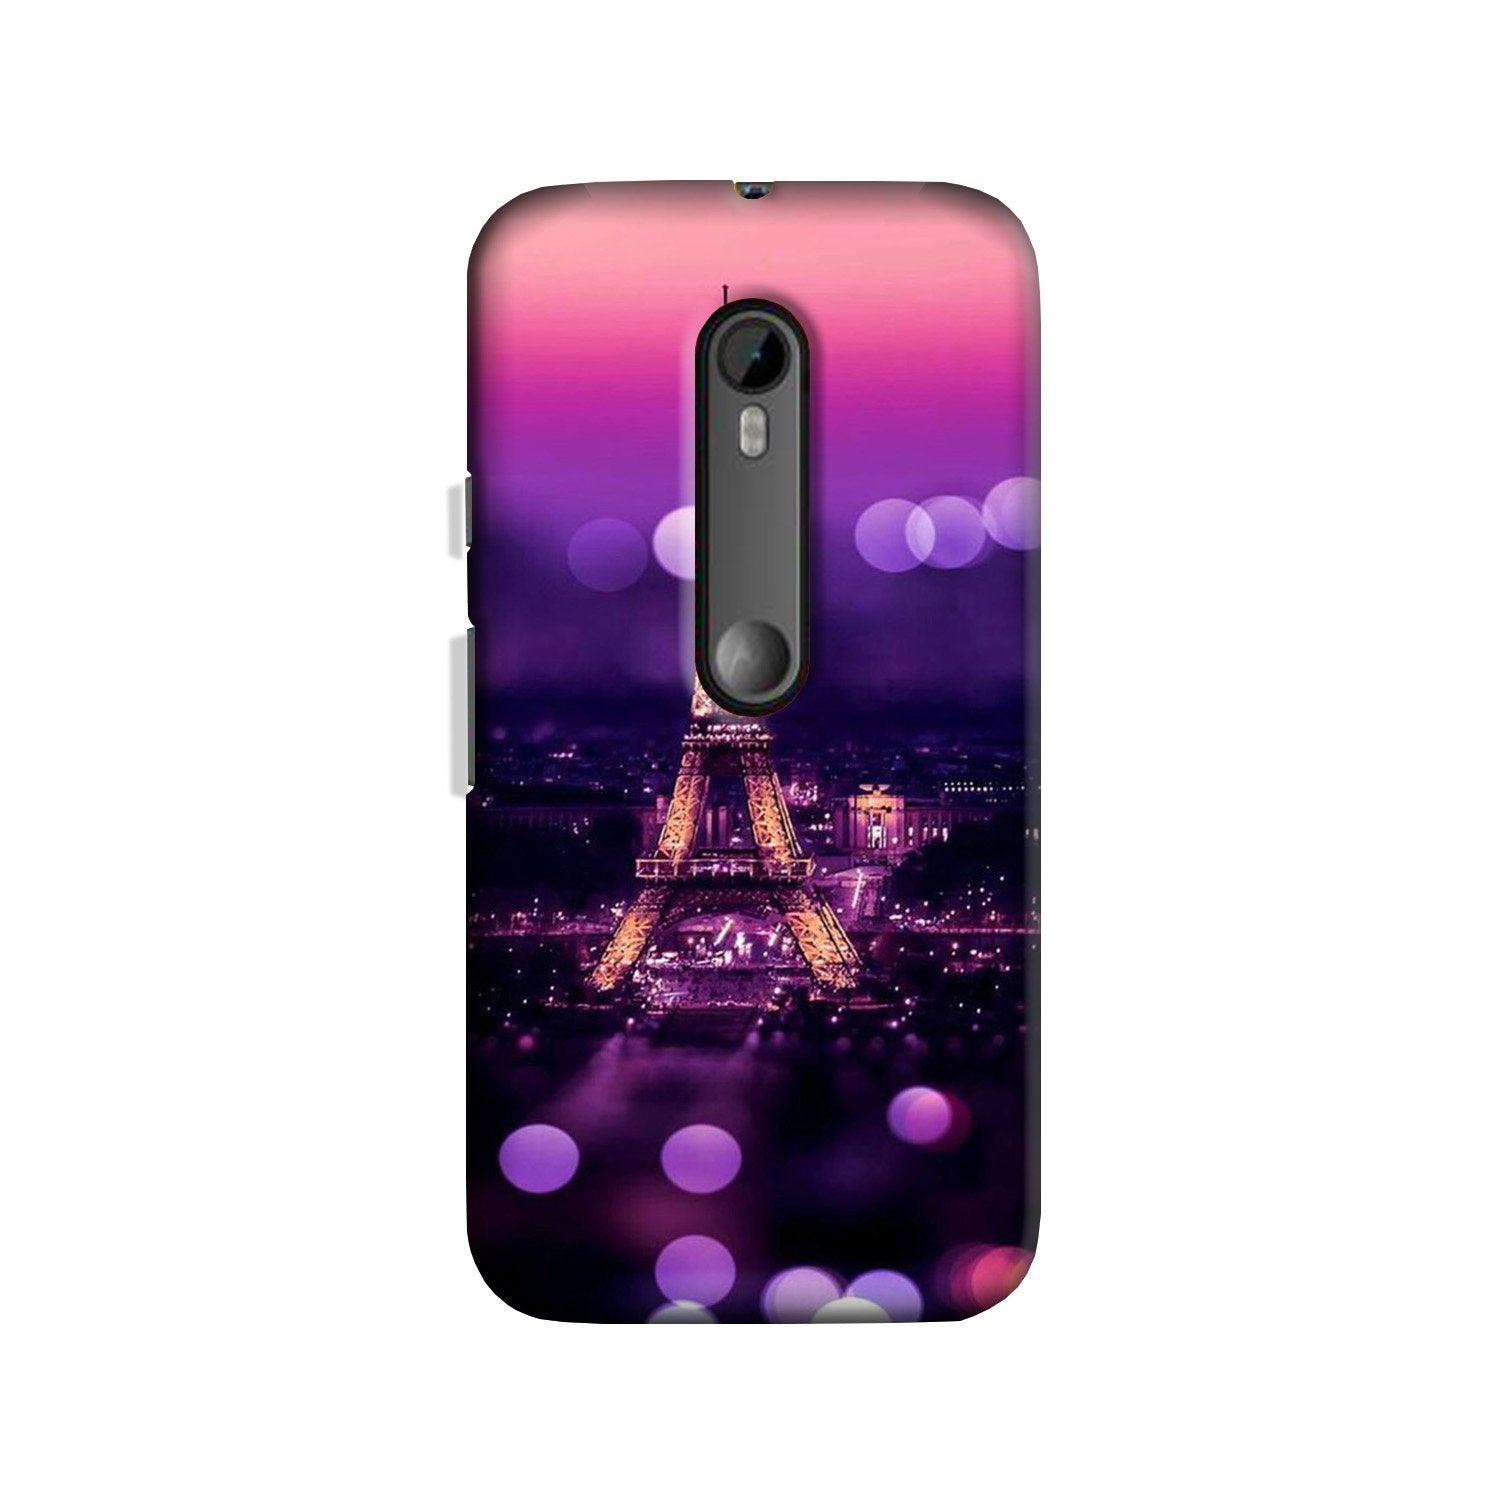 Eiffel Tower Case for Moto X Force